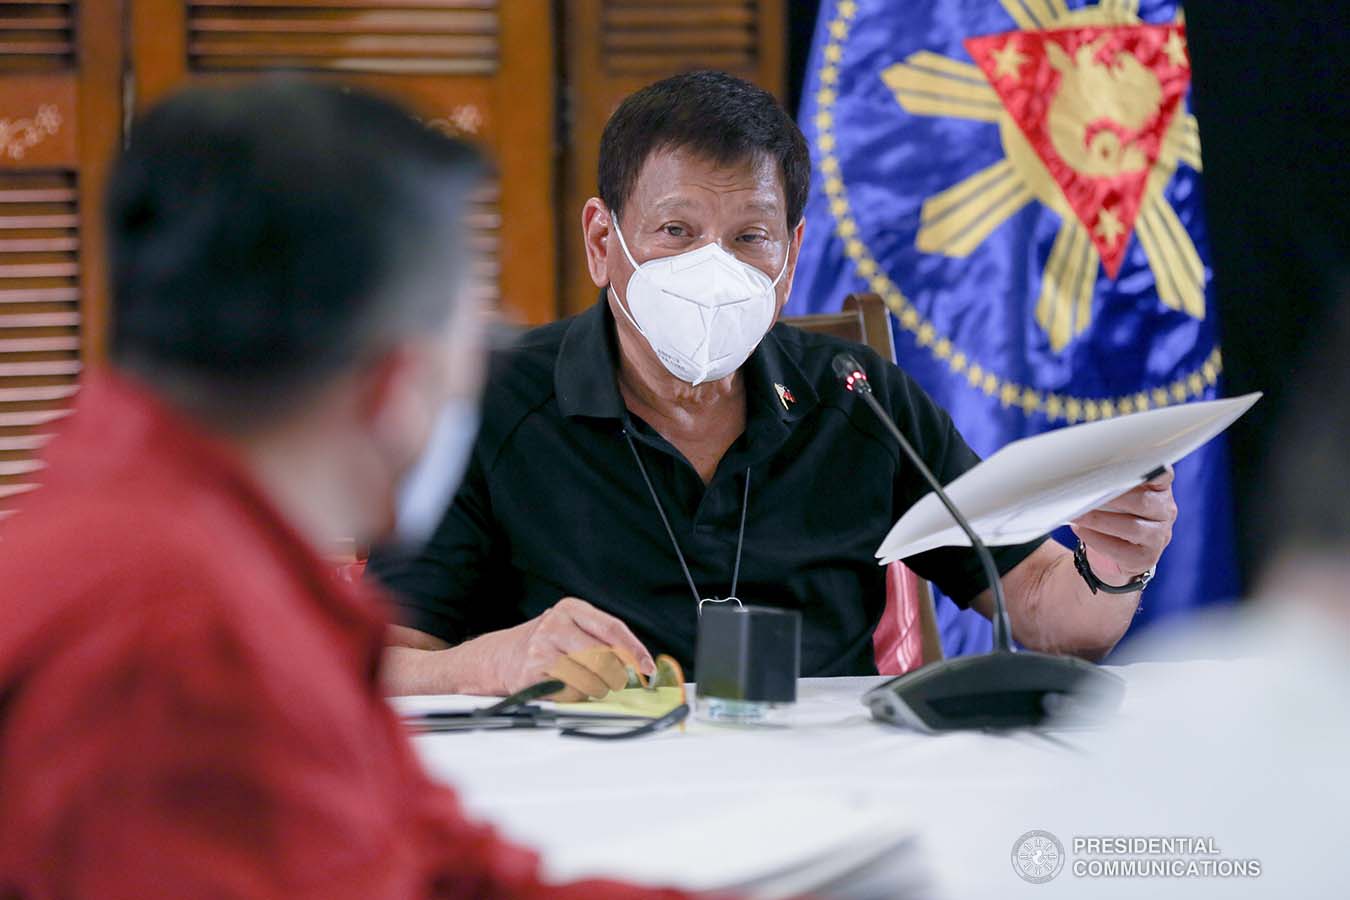 President Rodrigo Roa Duterte holds a meeting with the Inter-Agency Task Force on the Emerging Infectious Diseases (IATF-EID) core members at the Matina Enclaves in Davao City on August 24, 2020. SIMEON CELI JR./PRESIDENTIAL PHOTO